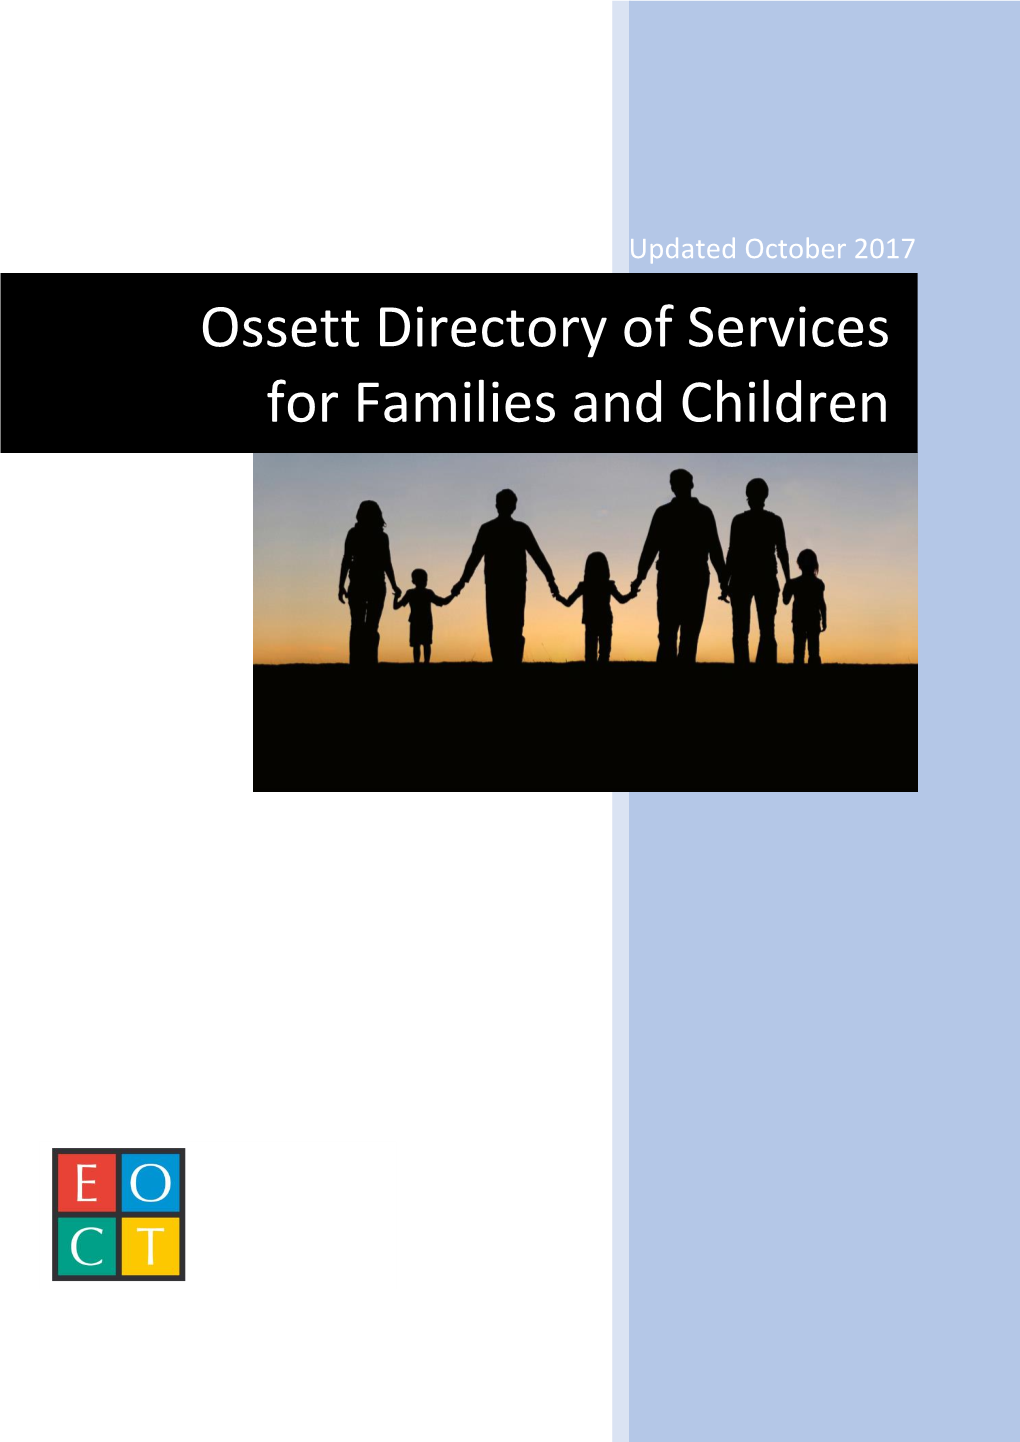 Ossett Directory of Services for Families and Children